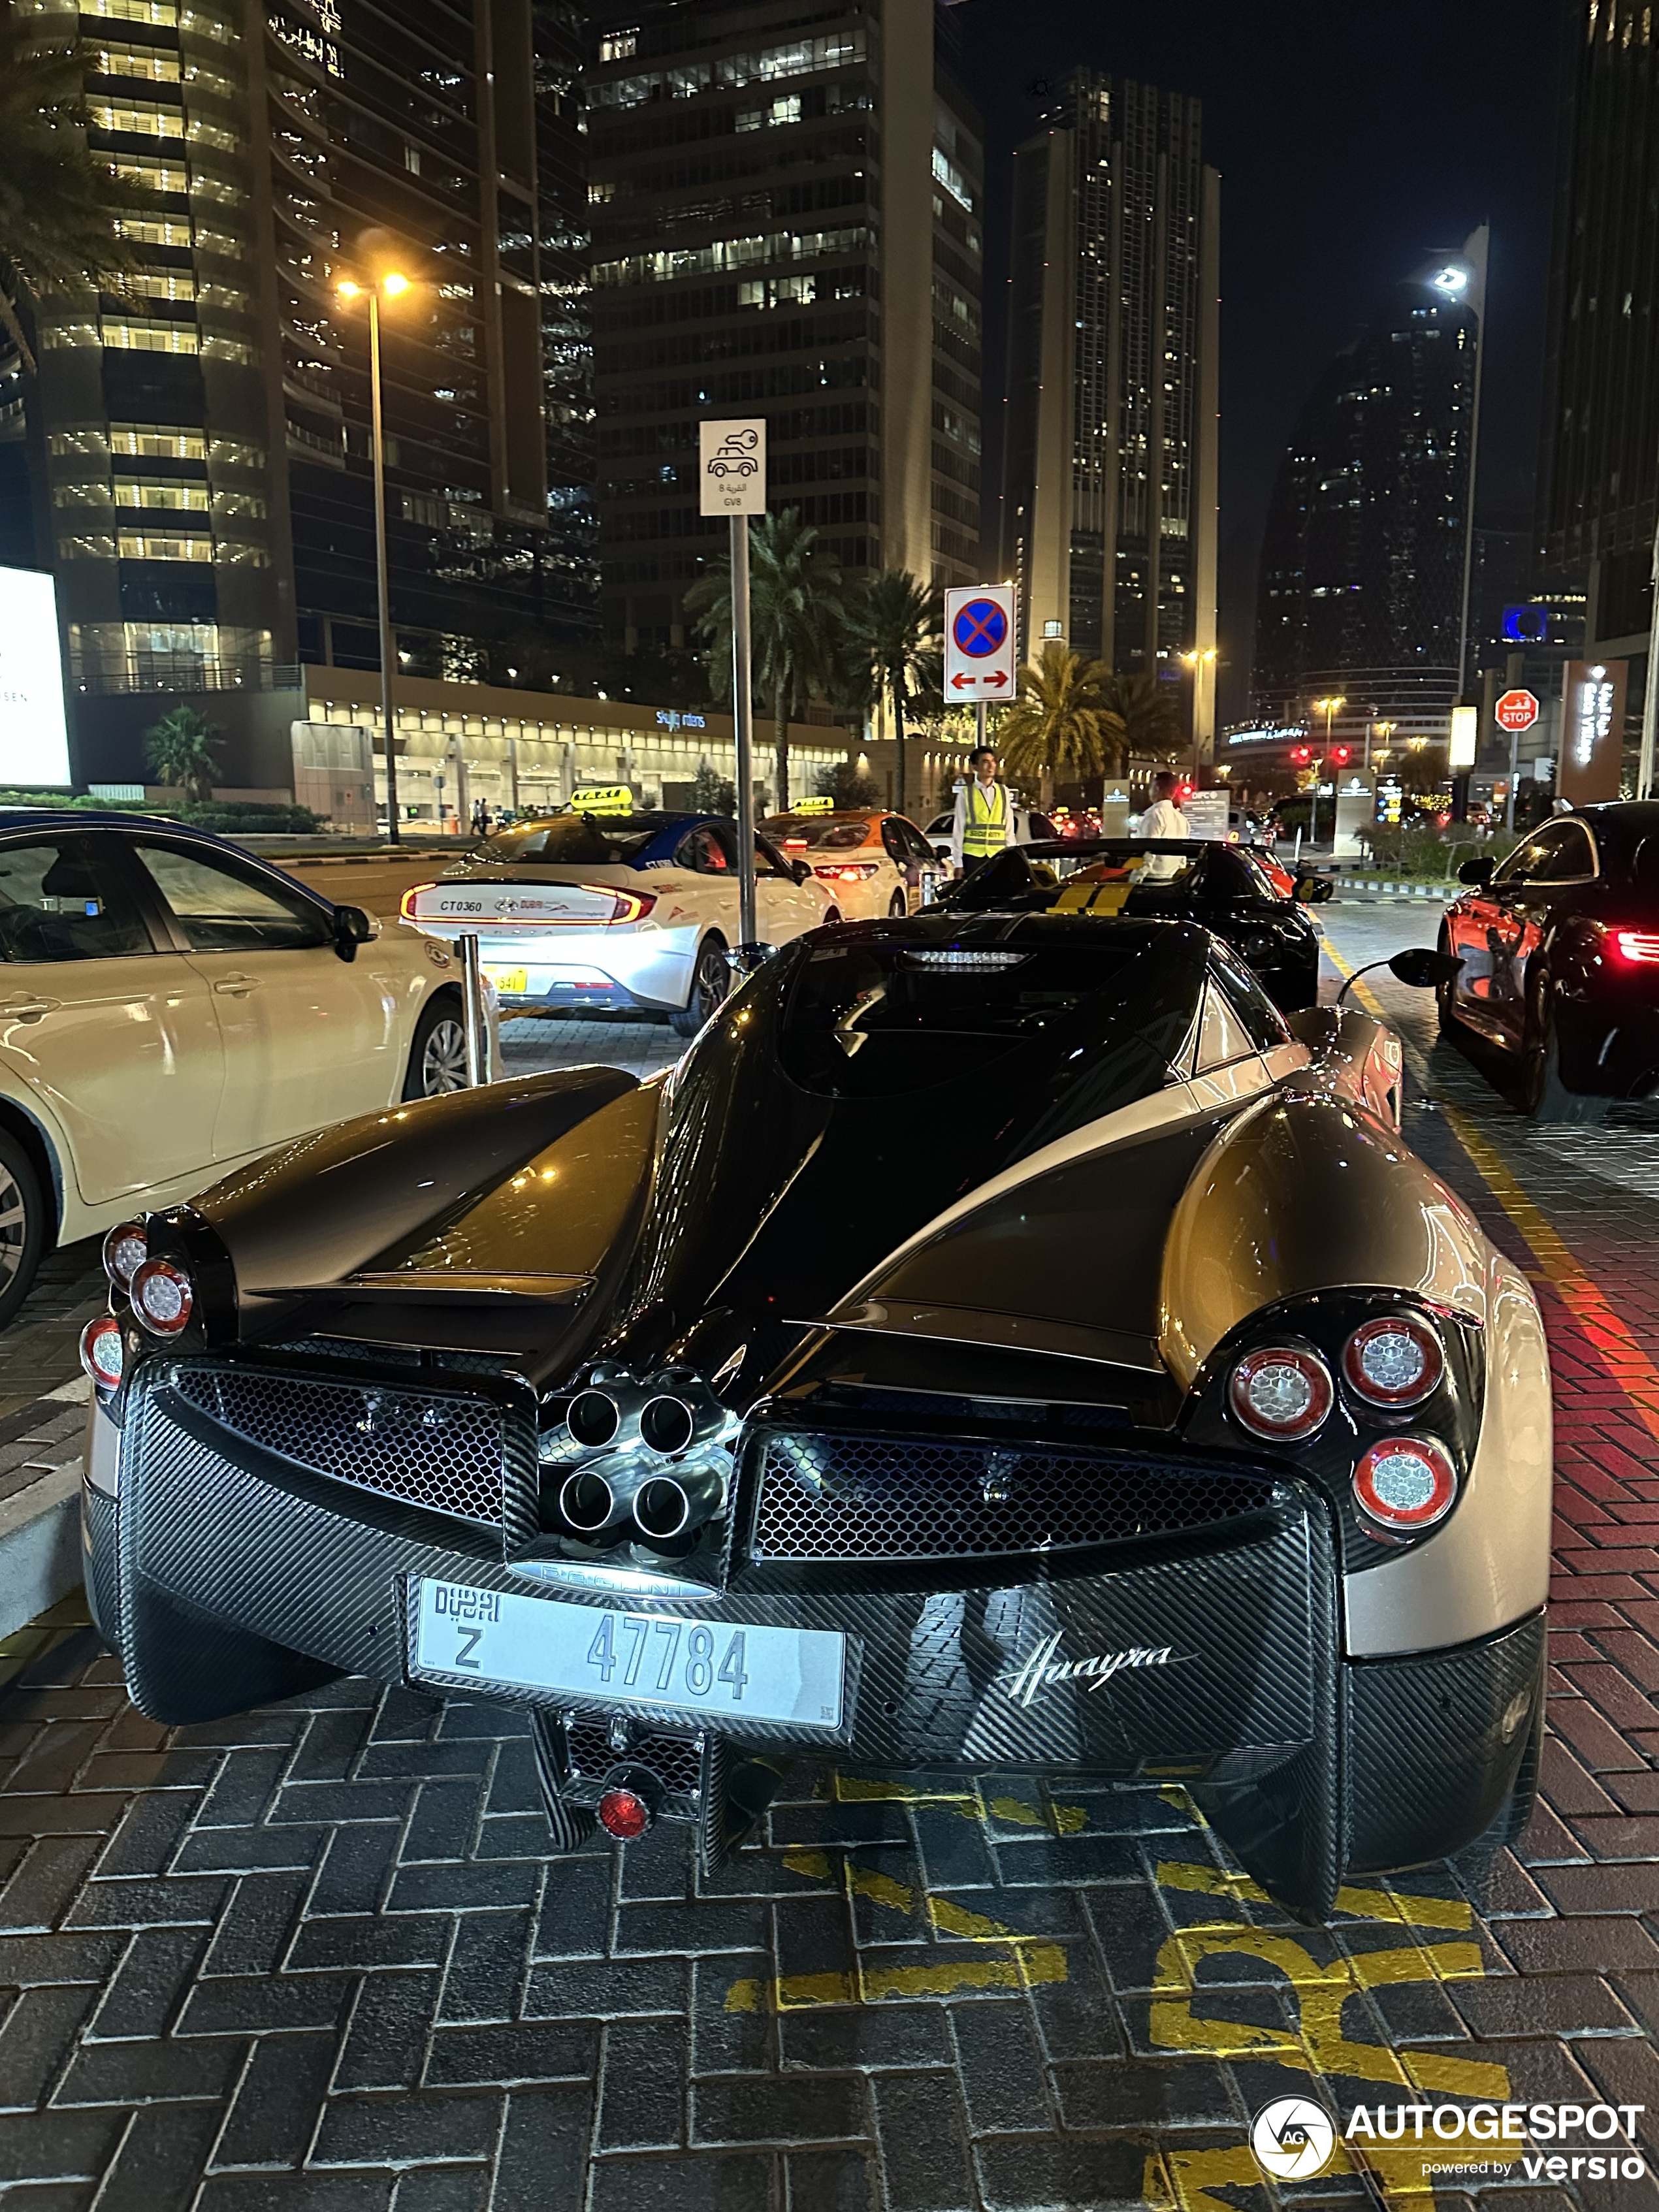 Dubai seems to have an exciting night life